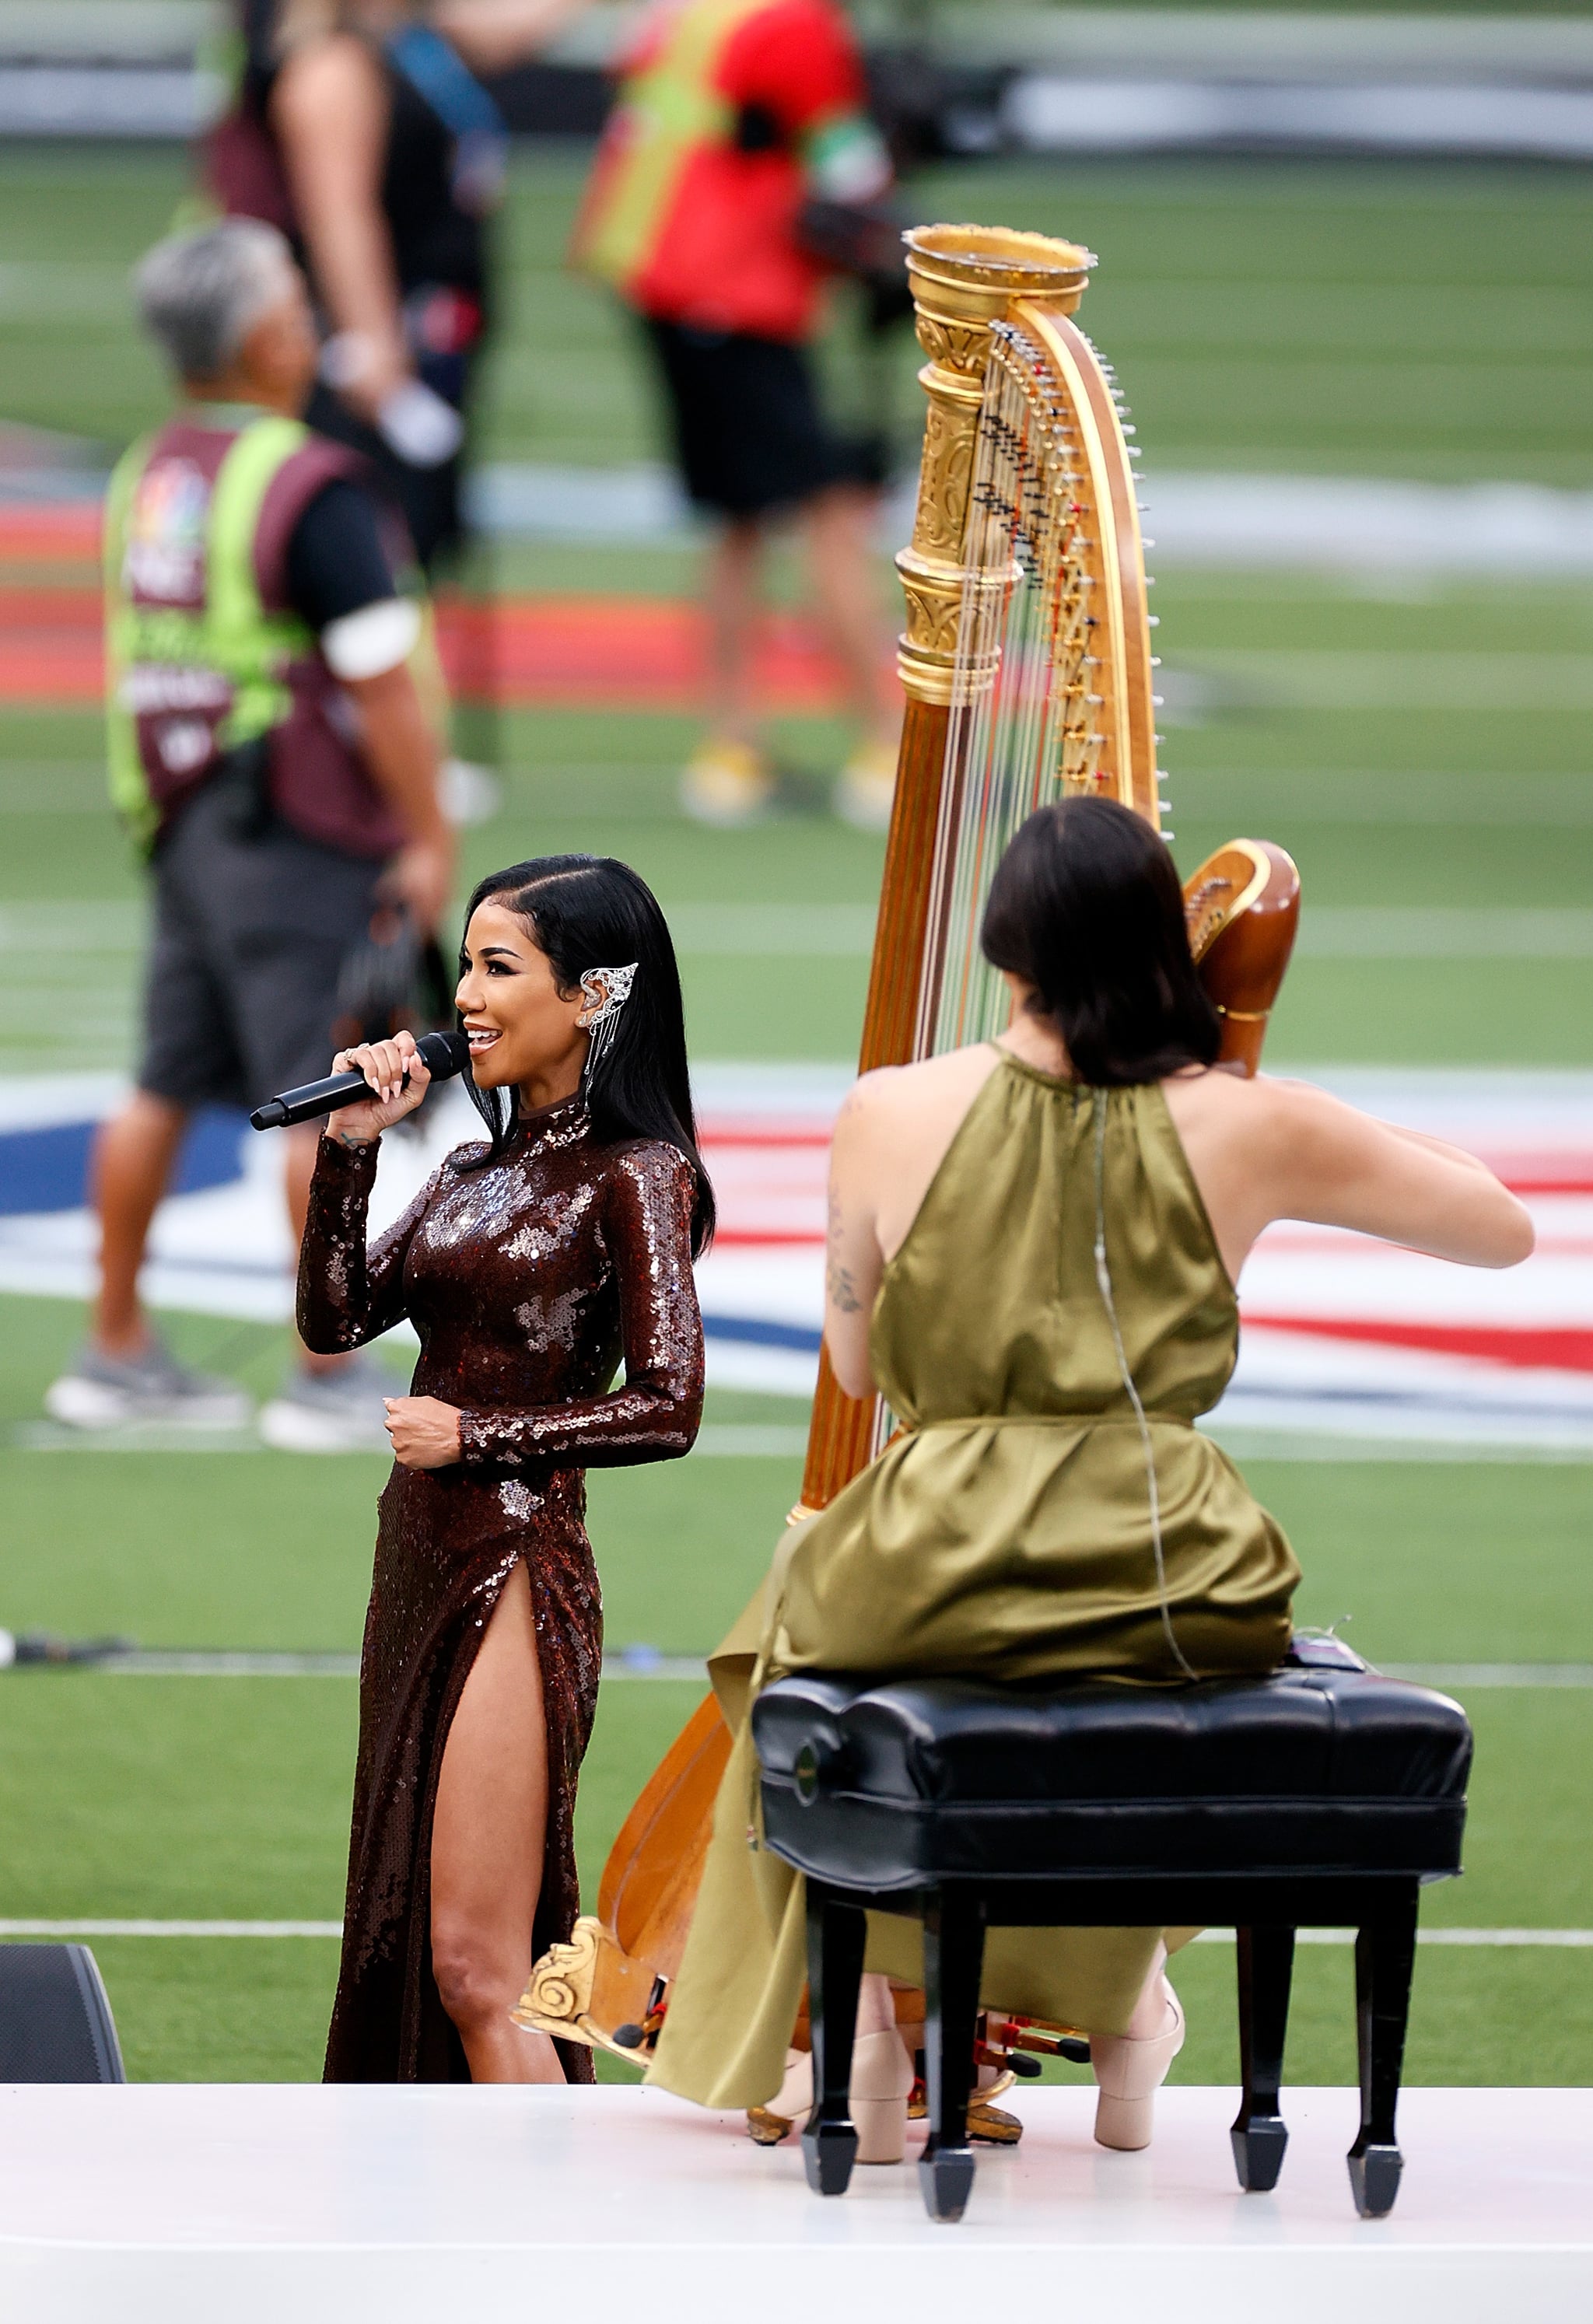 INGLEWOOD, CALIFORNIA - FEBRUARY 13: Singer Jhene Aiko performs America The Beautiful prior to Super Bowl LVI between the Los Angeles Rams and the Cincinnati Bengals at SoFi Stadium on February 13, 2022 in Inglewood, California. (Photo by Steph Chambers/Getty Images)